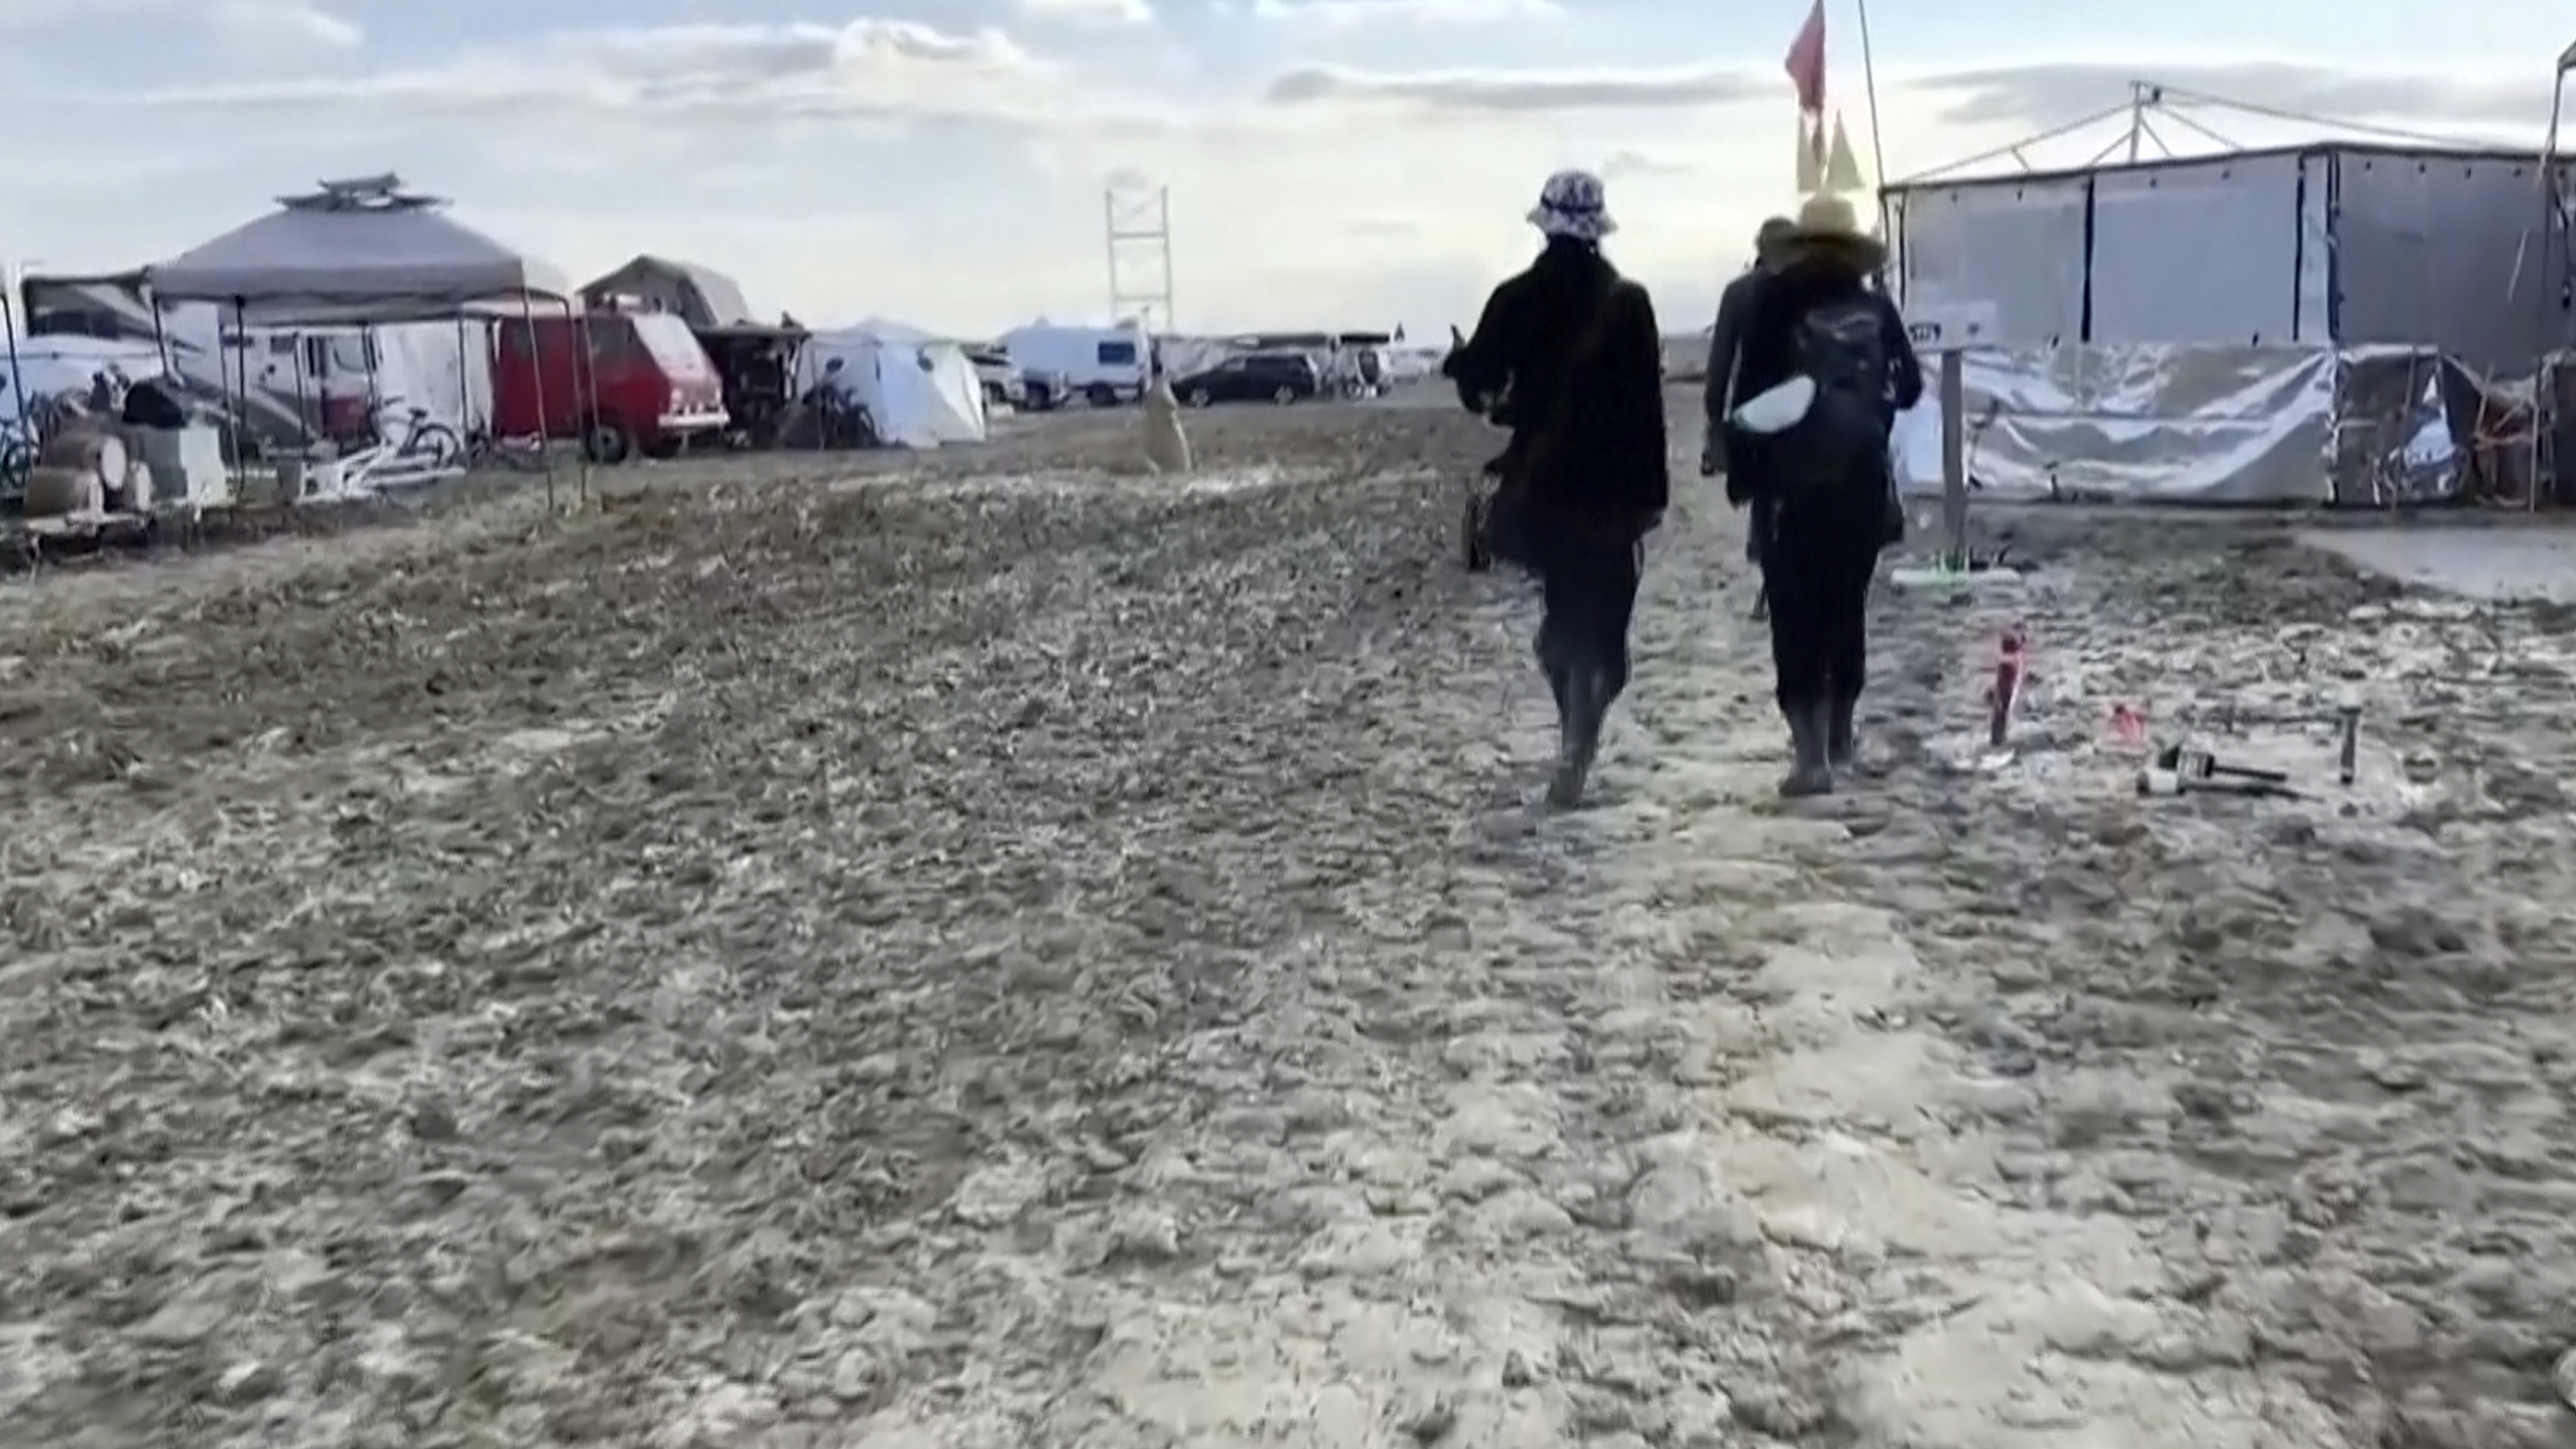 In this image from video provided by Rebecca Barger, people walk along a muddy path at the Burning Man festival site in Black Rock, Nev., on Sept. 4, 2023. (Rebecca Barger/@rebeccabargerphoto via AP)